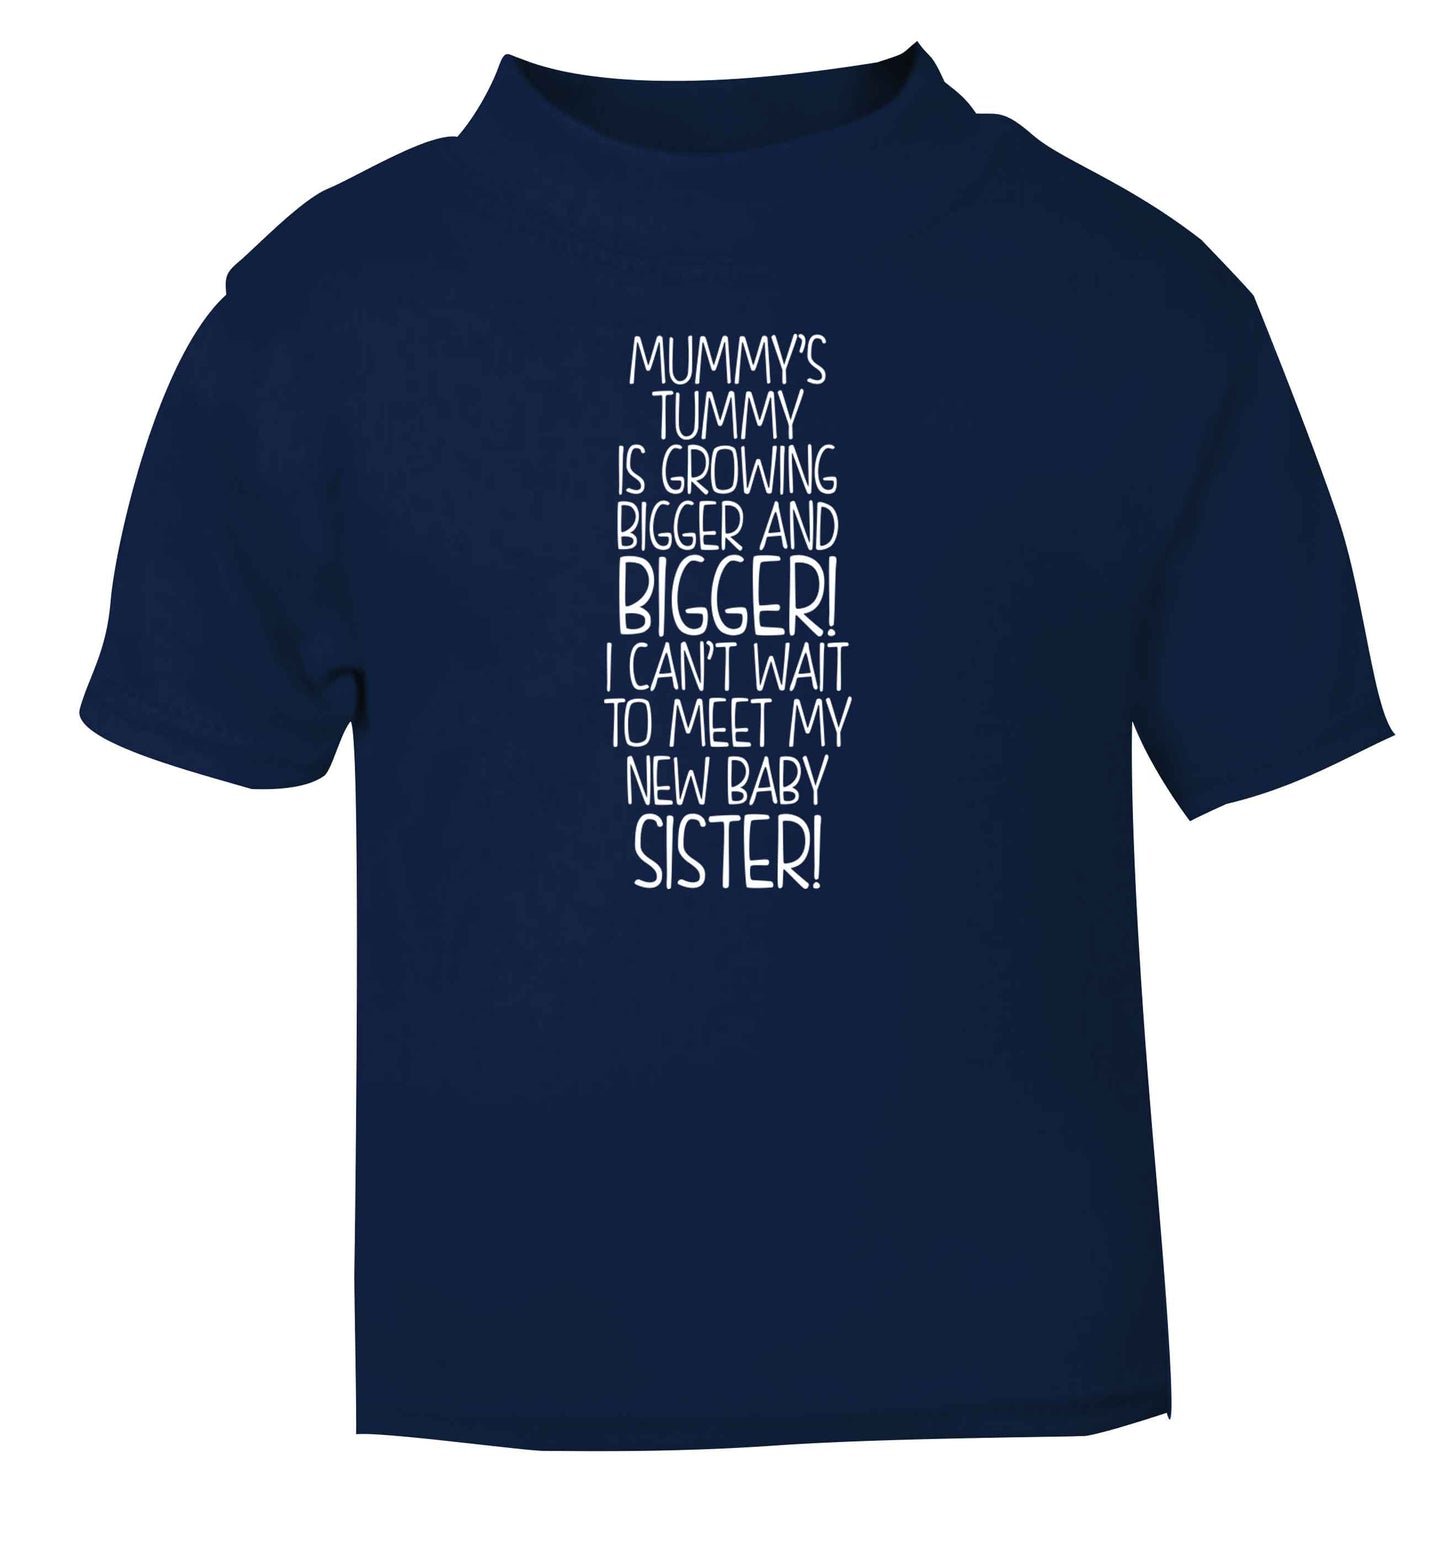 Mummy's tummy is growing bigger and bigger I can't wait to meet my new baby sister! navy Baby Toddler Tshirt 2 Years